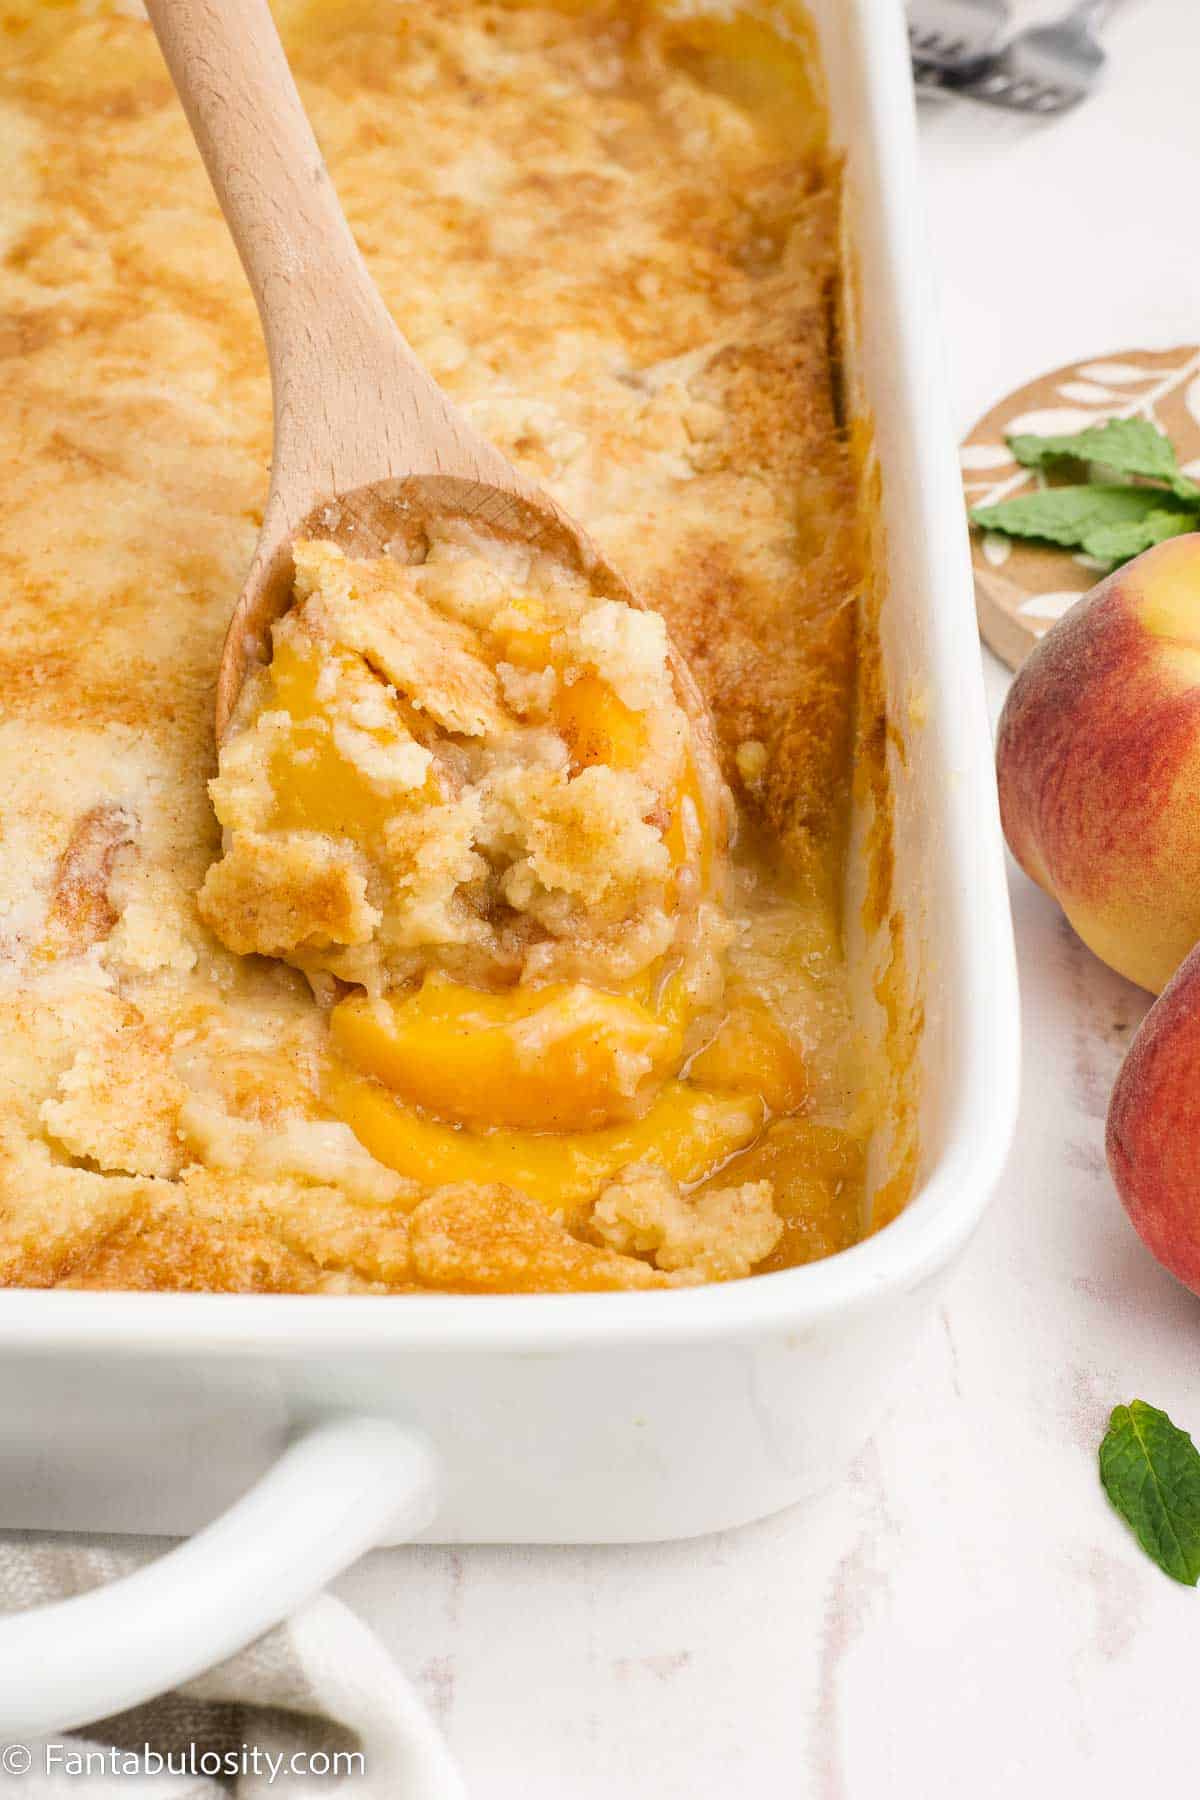 Peach cobbler made with a cake mix, in a white baking pan.